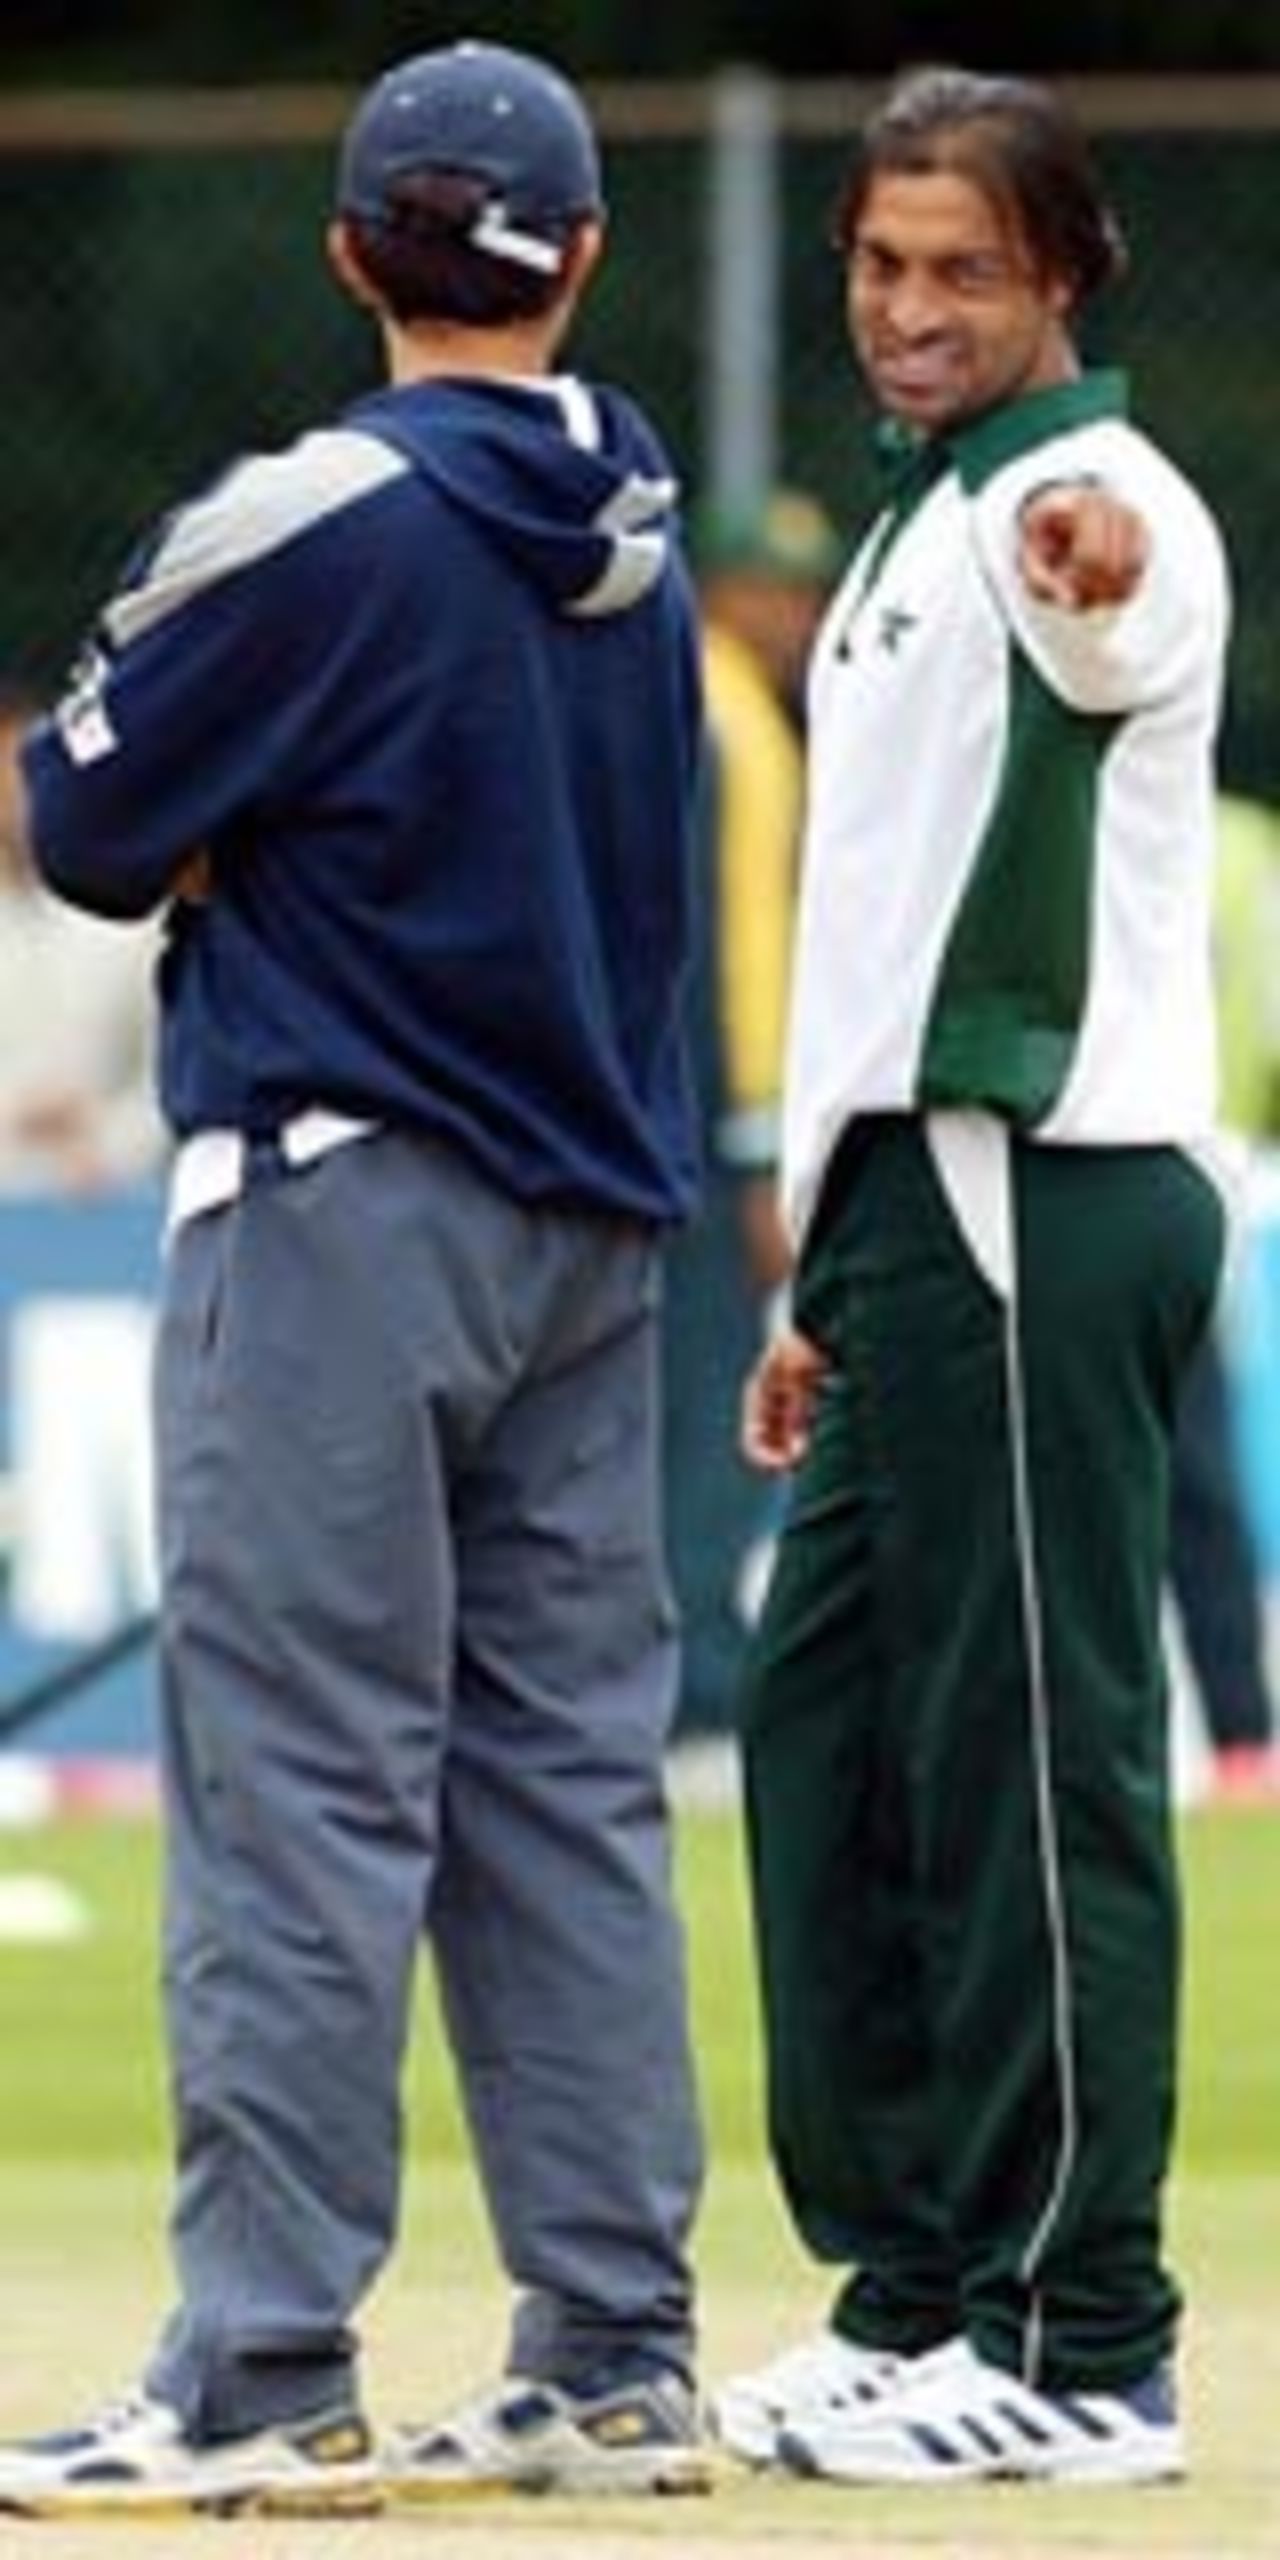 Shoaib Akhtar chats with Sourav Ganguly, India v Pakistan, 1st match, Videocon Cup, Amstelveen, August 21, 2004